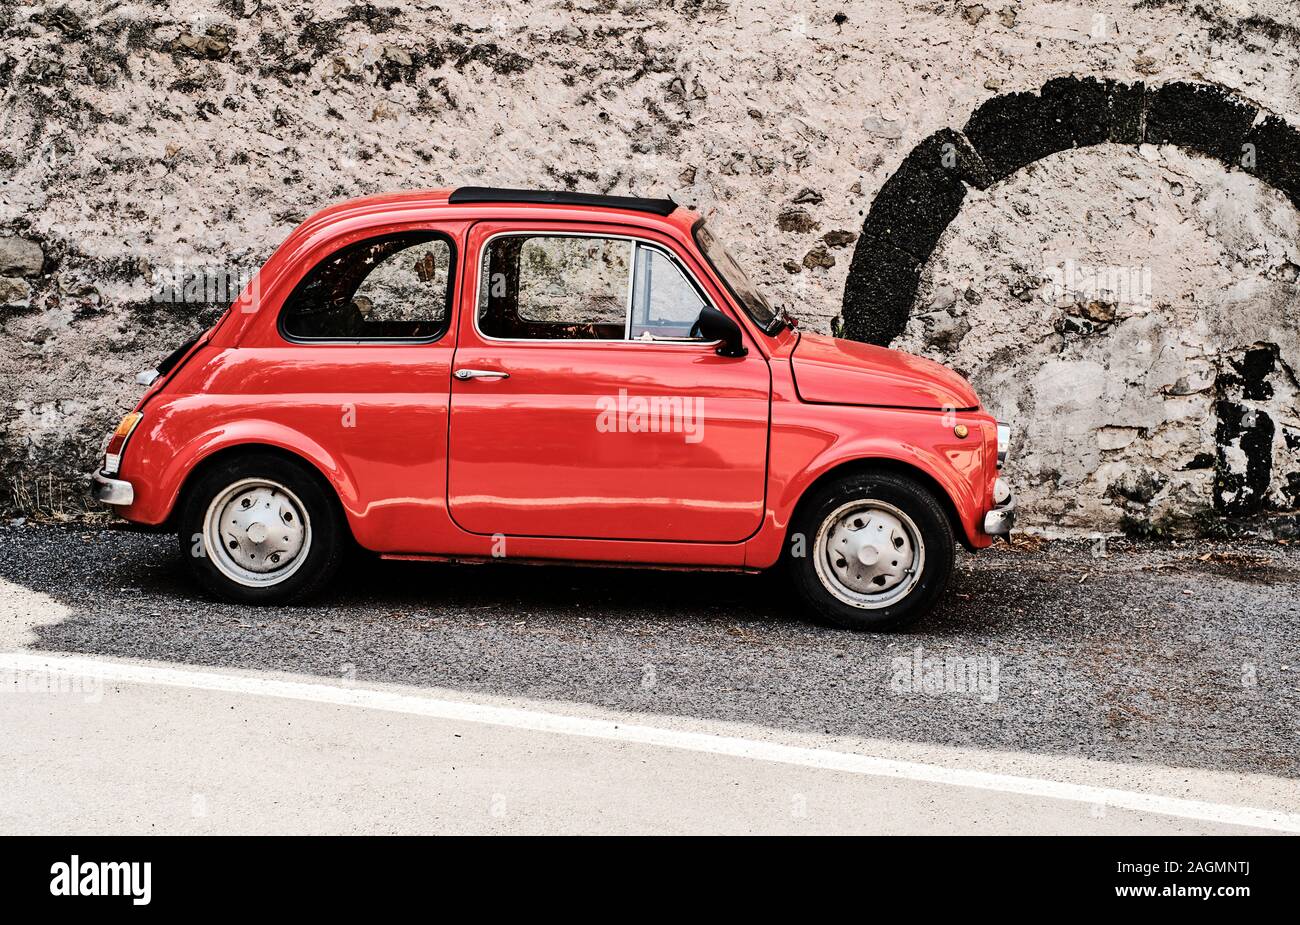 A bright red classic Fiat Cinque Cento / Fiat 500 parked in a street in  Italy Stock Photo - Alamy